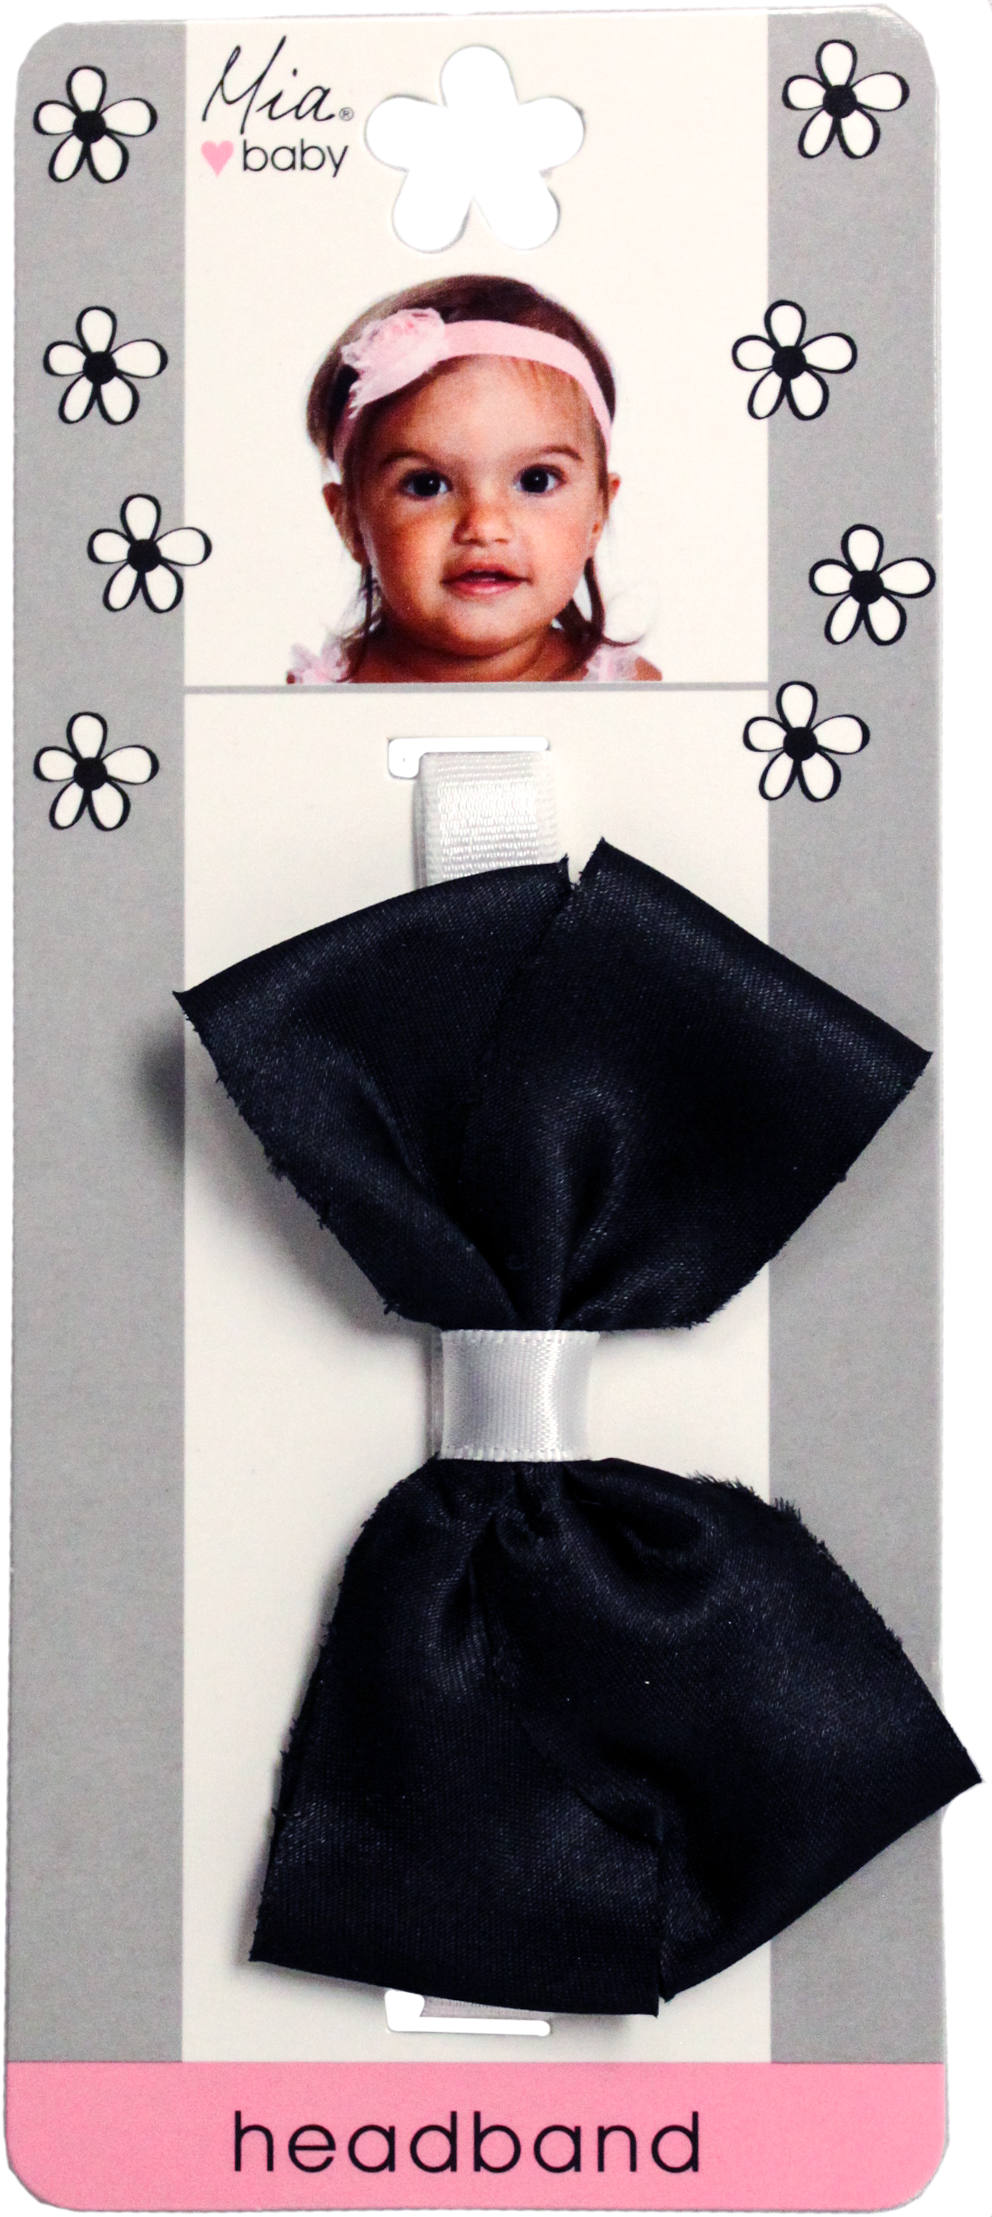 Hair bands for kids  Wine Bow on Black Satin - faye